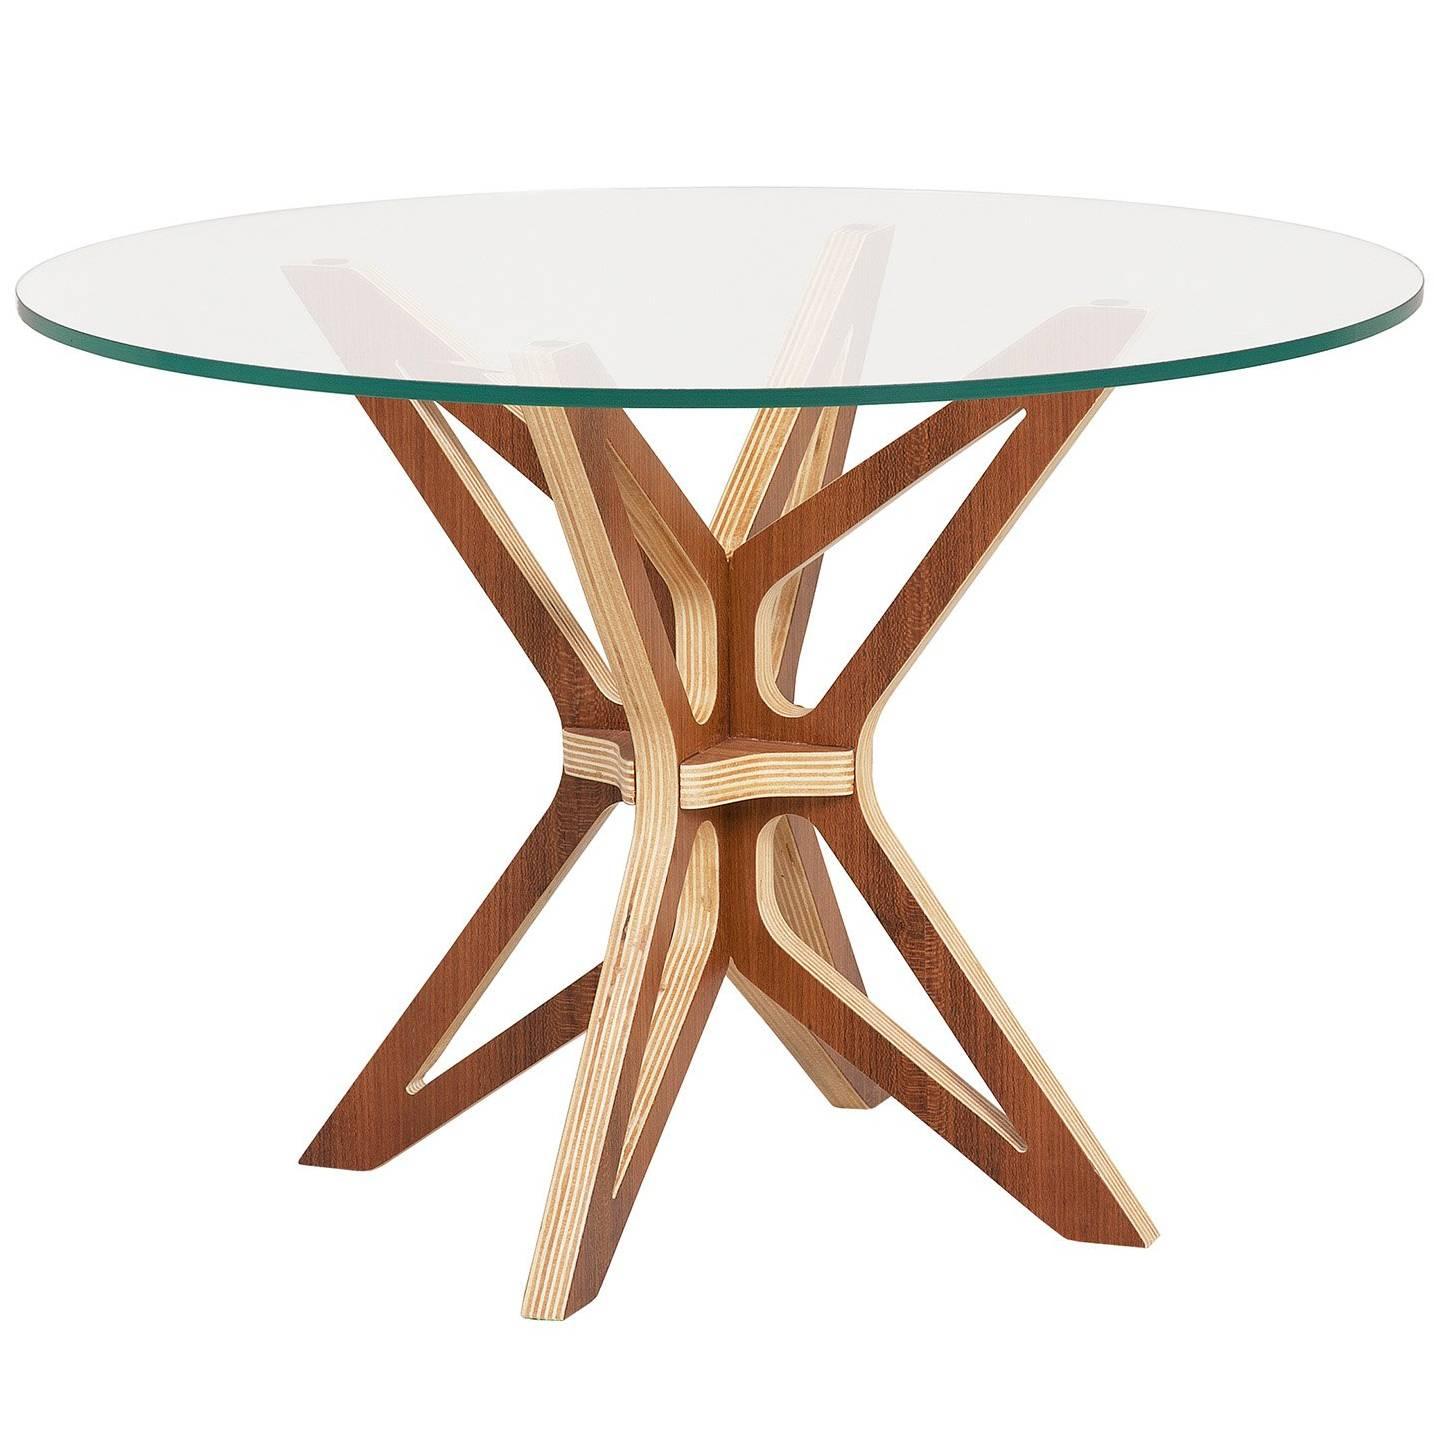 Mariposa Brazilian Contemporary Wood Side Table by Lattoog